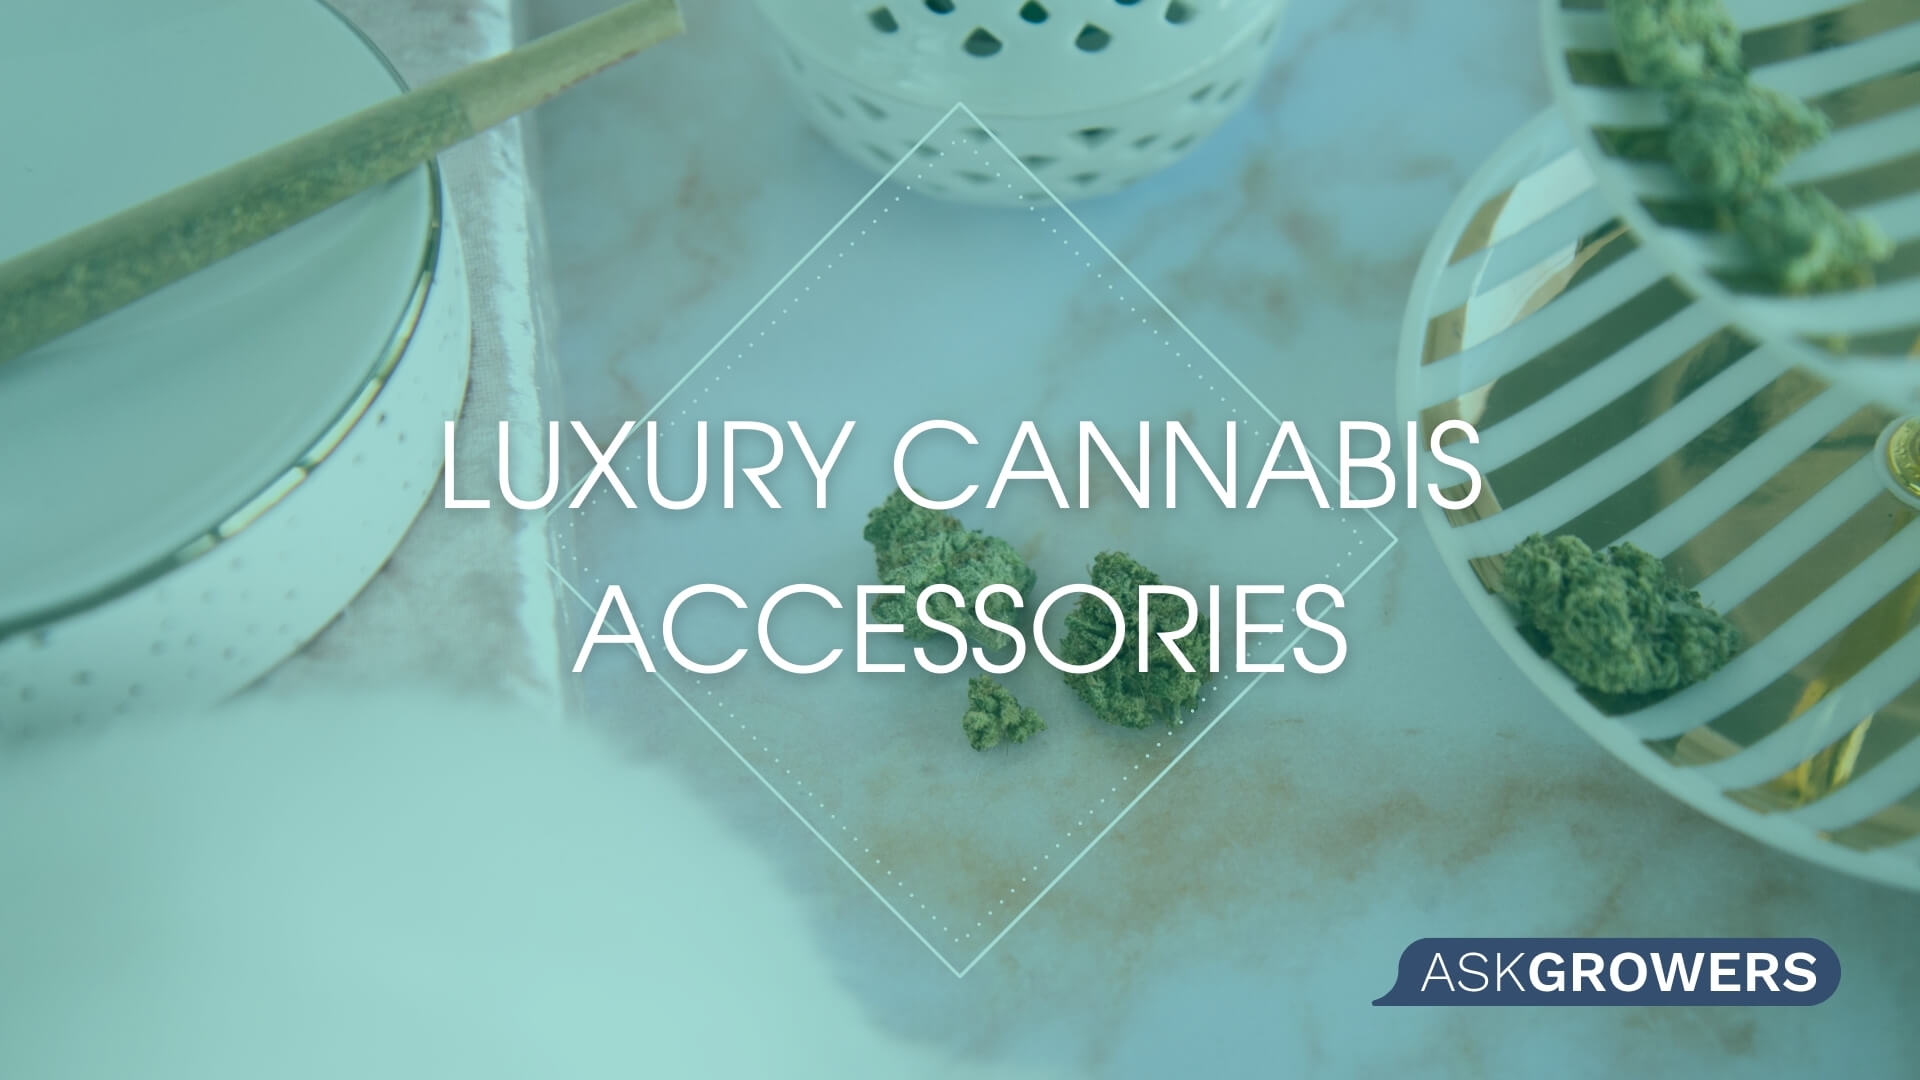 Are Luxury Cannabis Accessories Worth Their High Price?